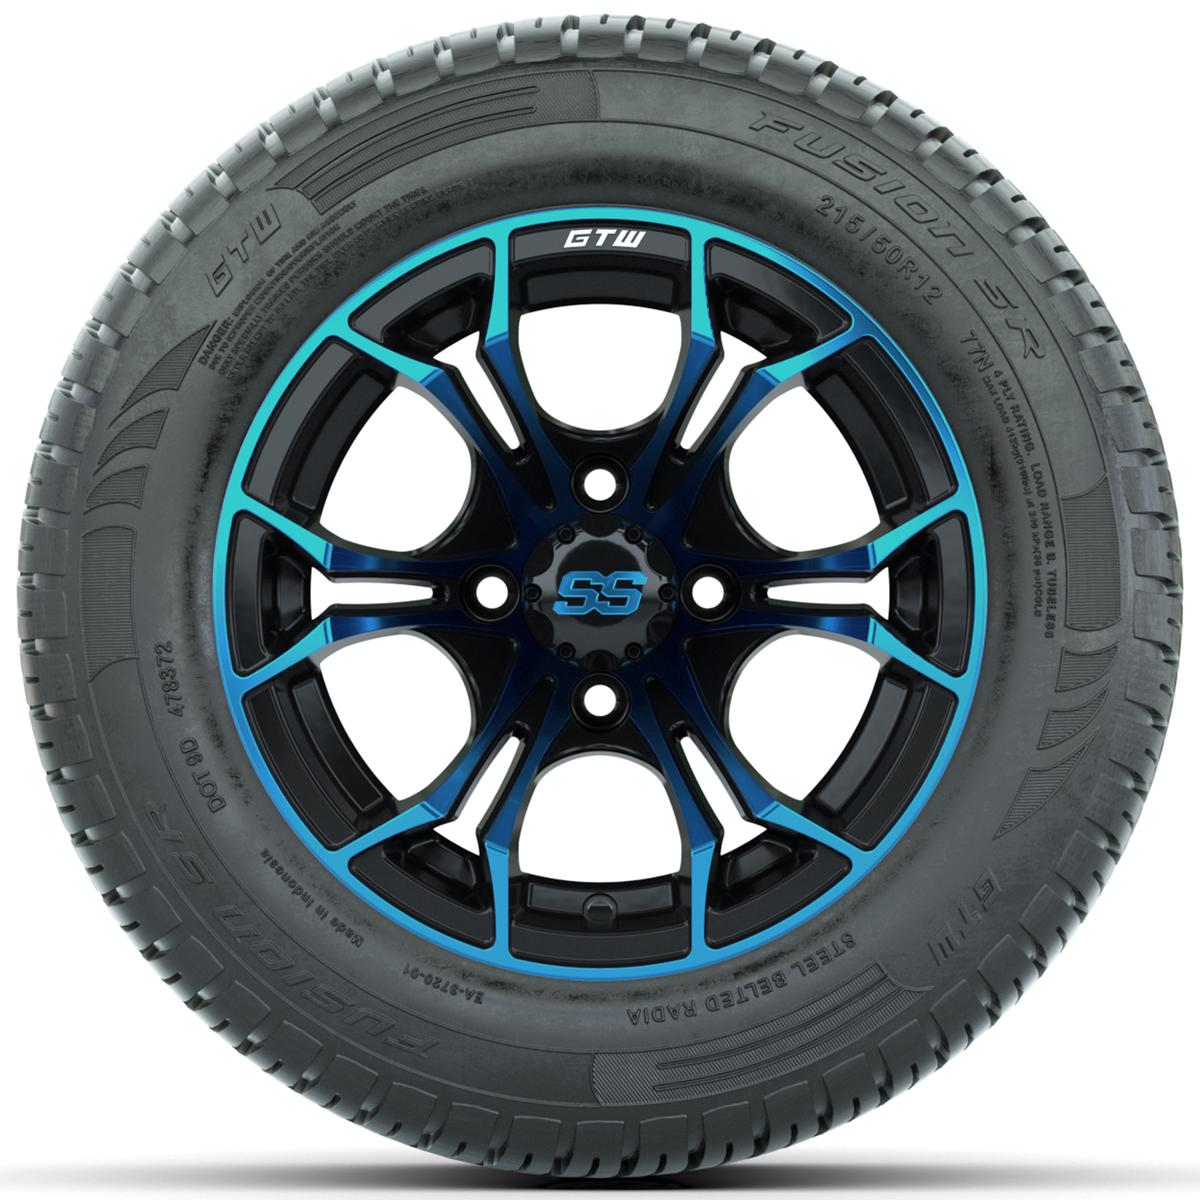 Set of (4) 12 in GTW Spyder Wheels with 215/50-R12 Fusion S/R Street Tires